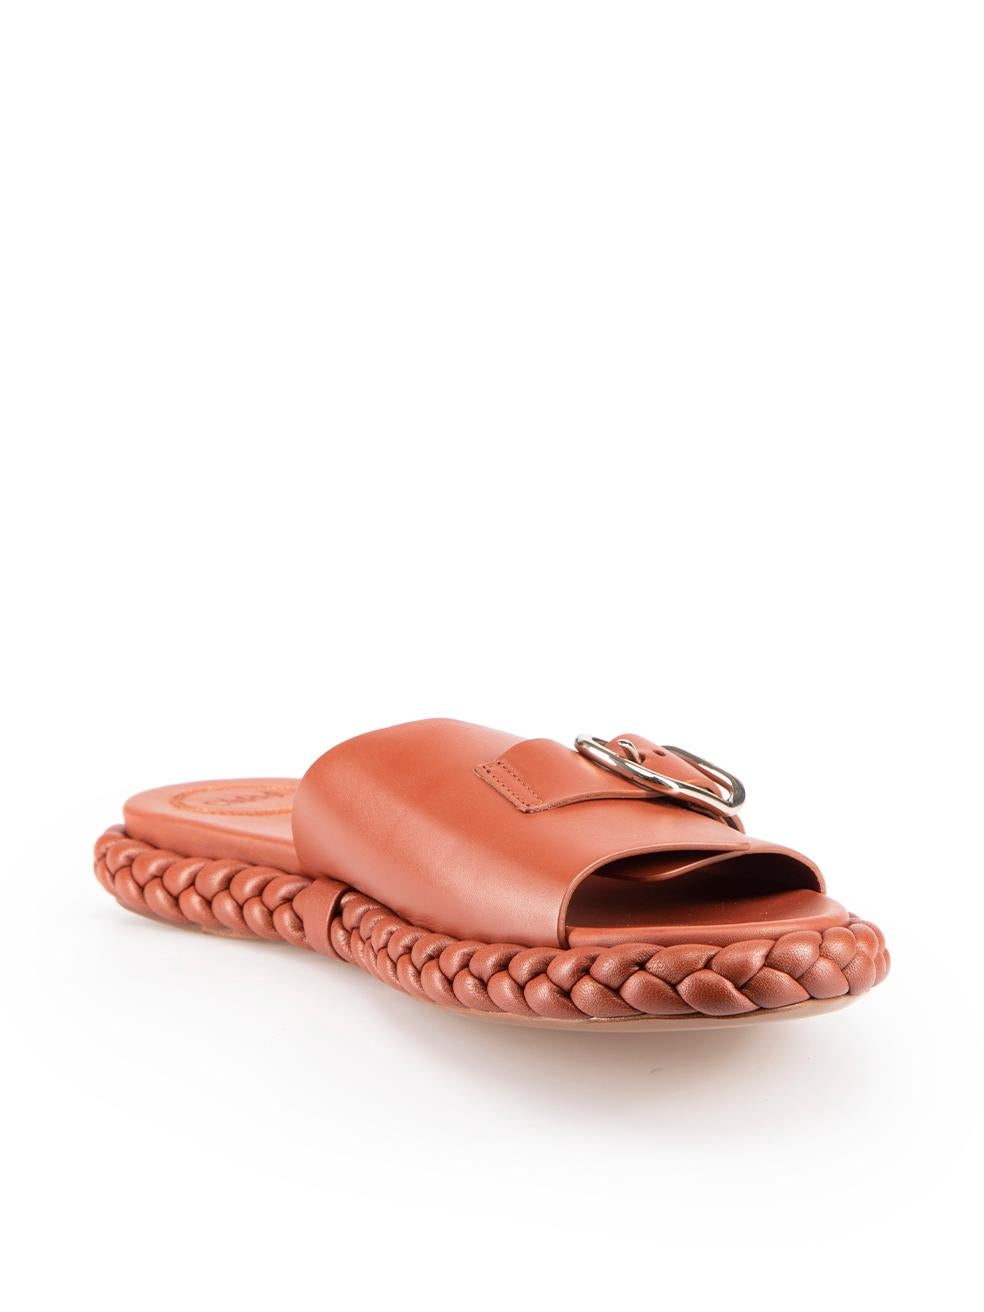 CONDITION is Never worn. No visible wear to shoes is evident on this new Chlo√© designer resale item.
 
Details
Brown
Leather
Slides
Silver buckle detail
Open toe
Braided sole detail
 
Made in Italy
 
Composition
EXTERIOR: Leather
INTERIOR: Leather
